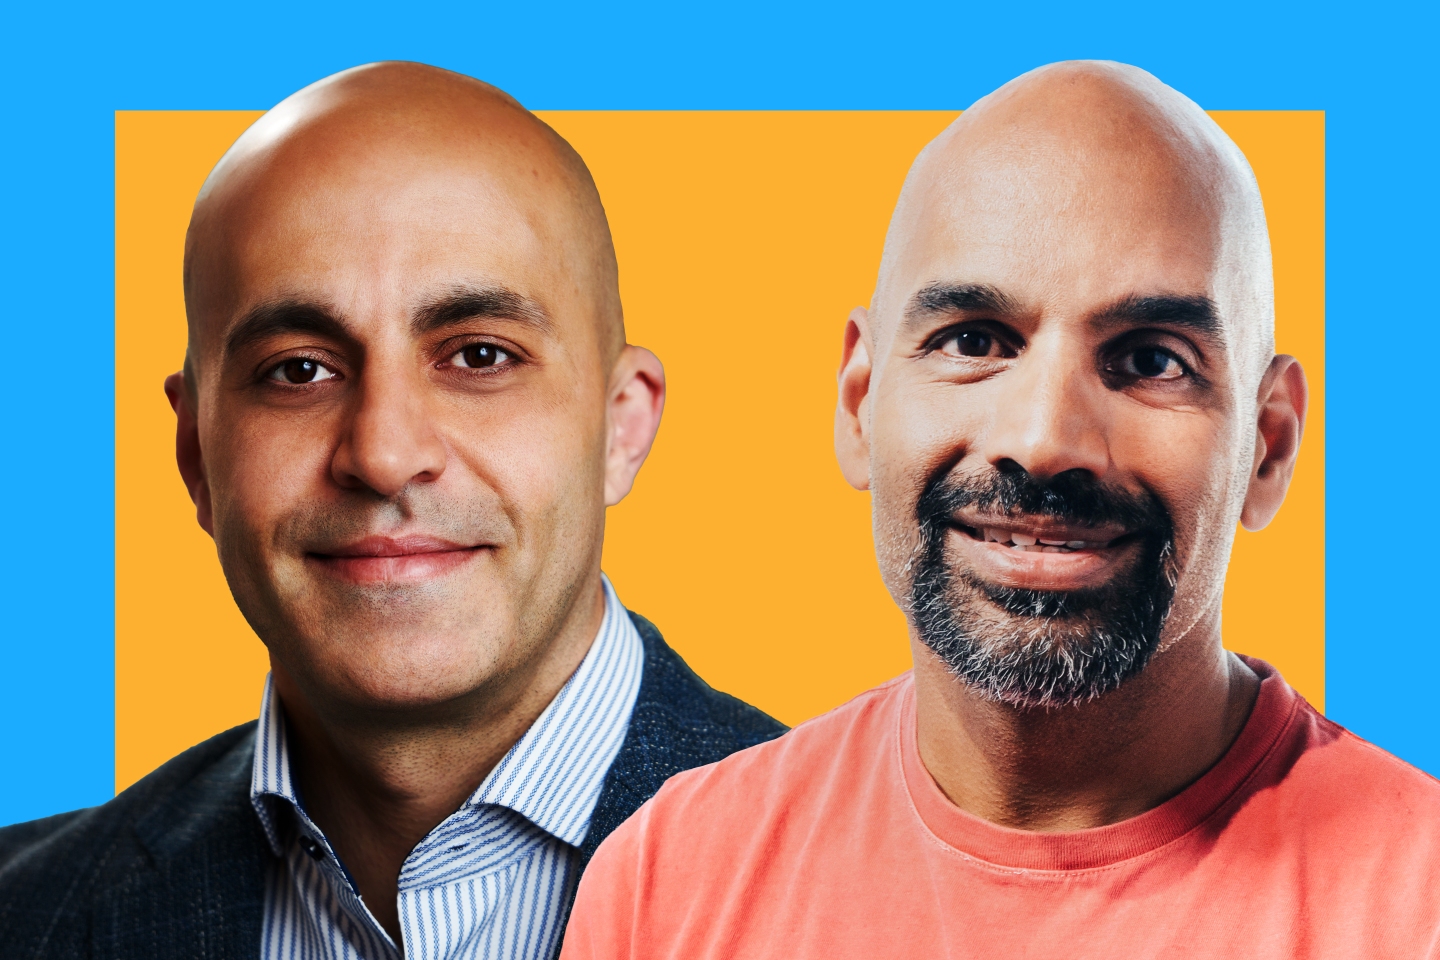 Ali Ghodsi, cofounder and CEO of Databricks, and Naveen Rao, cofounder and CEO of MosaicML.